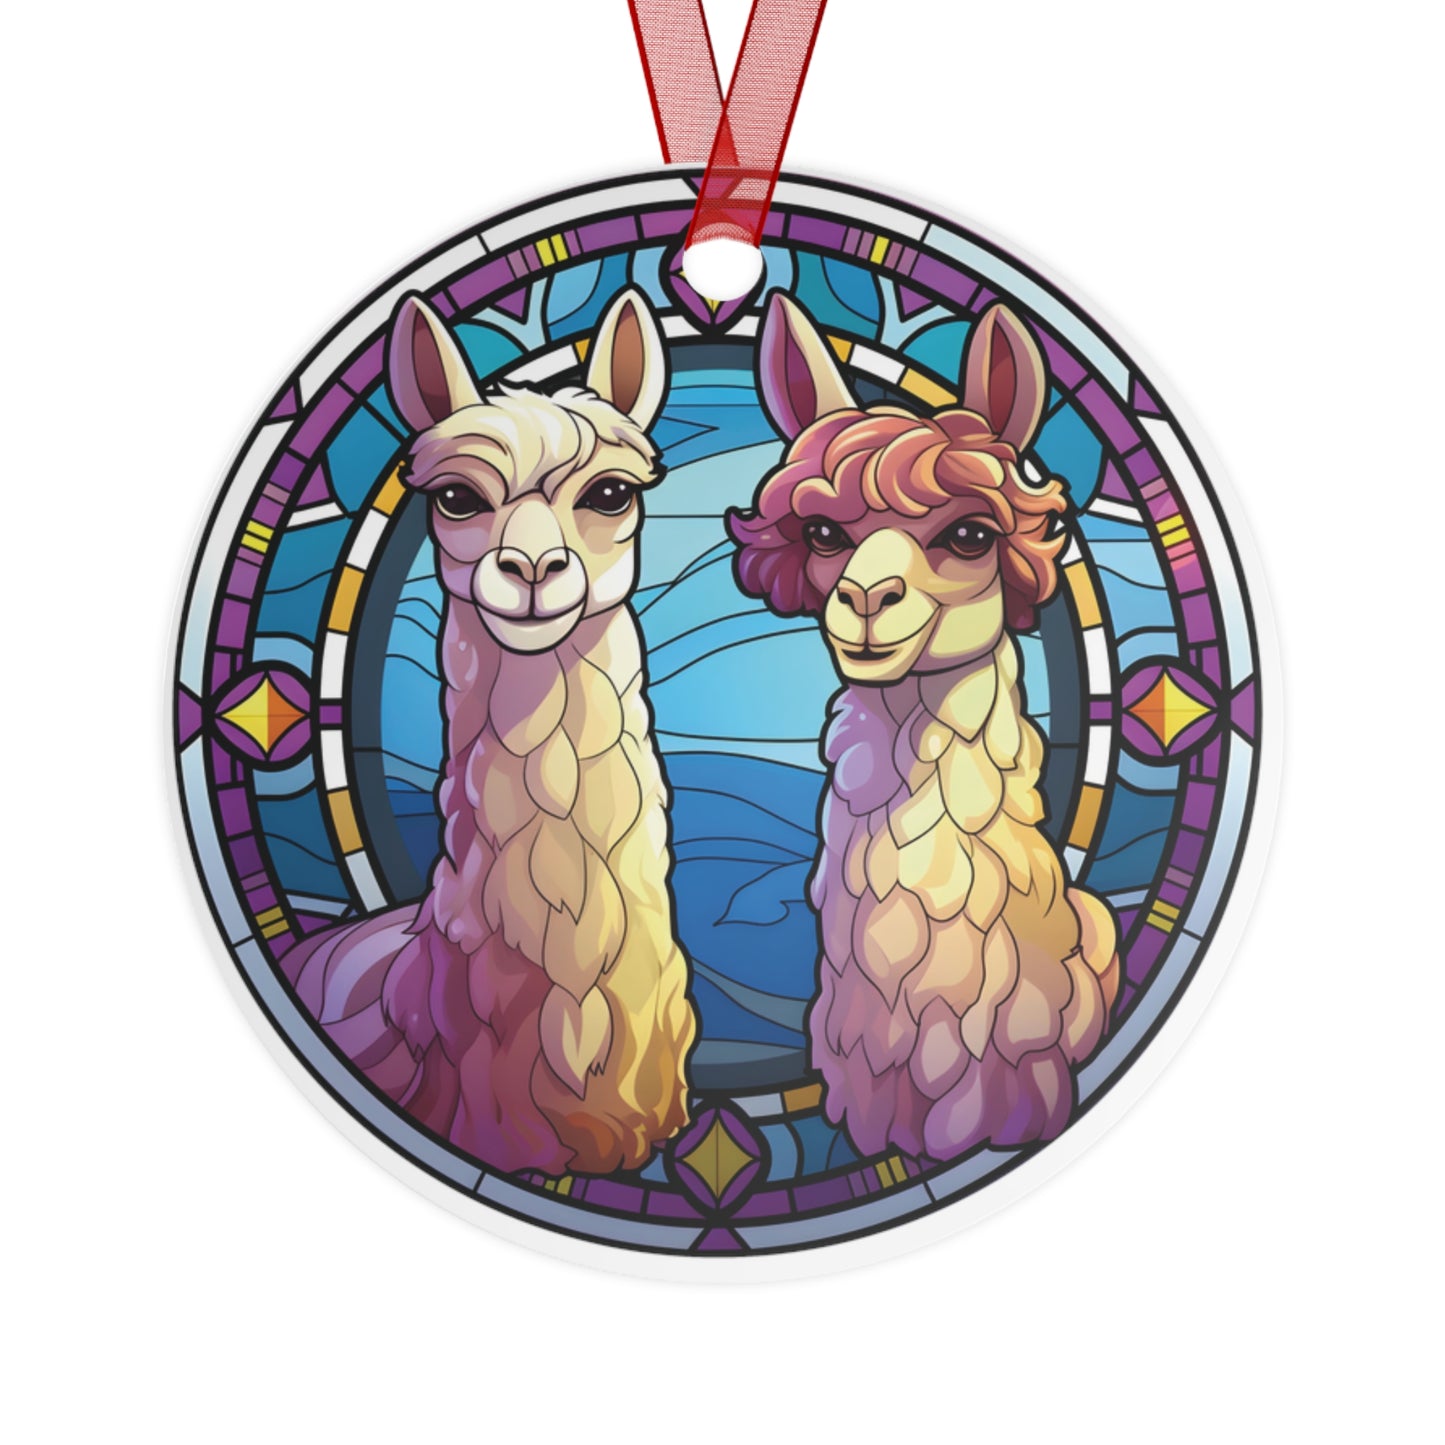 Lovable Llamas Alpacas Stained Glass Style Ornament Lightweight Shaterproof Metal Ornaments Christmas Ornament Exchange Decoration Christmas